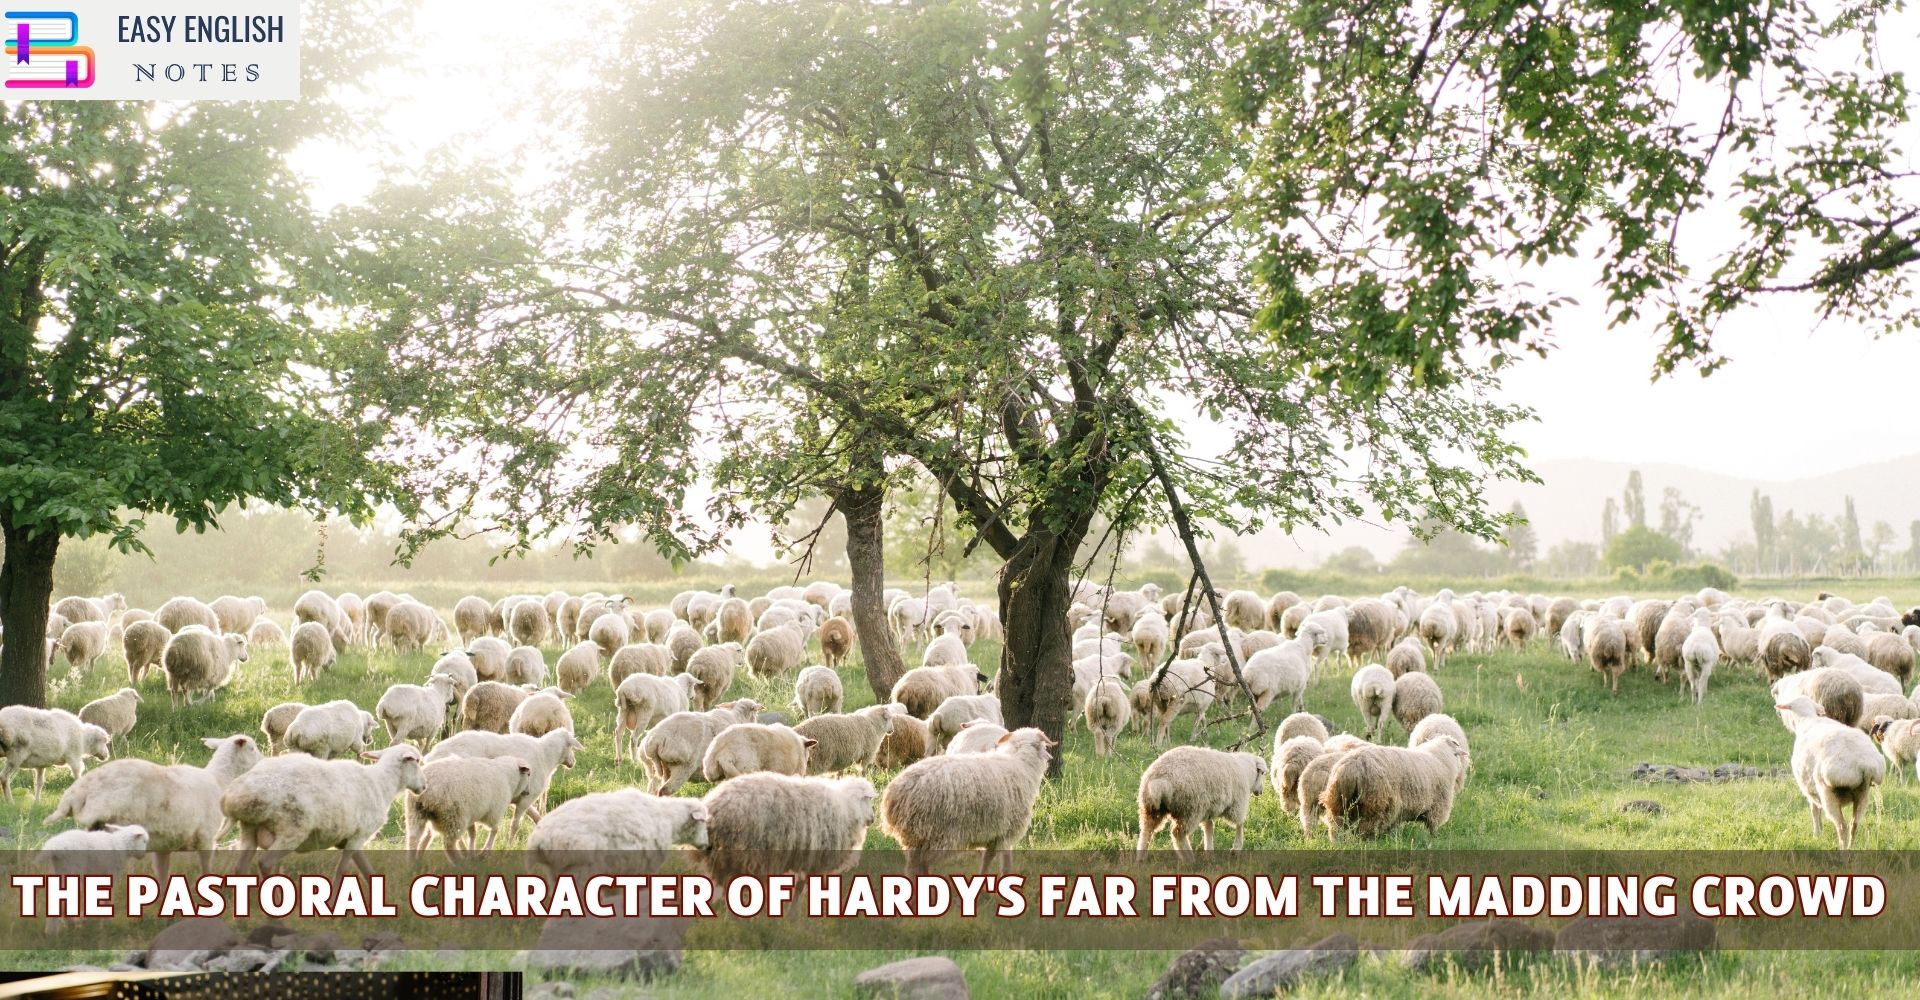 The Pastoral Character Of Hardy's Far From the Madding Crowd